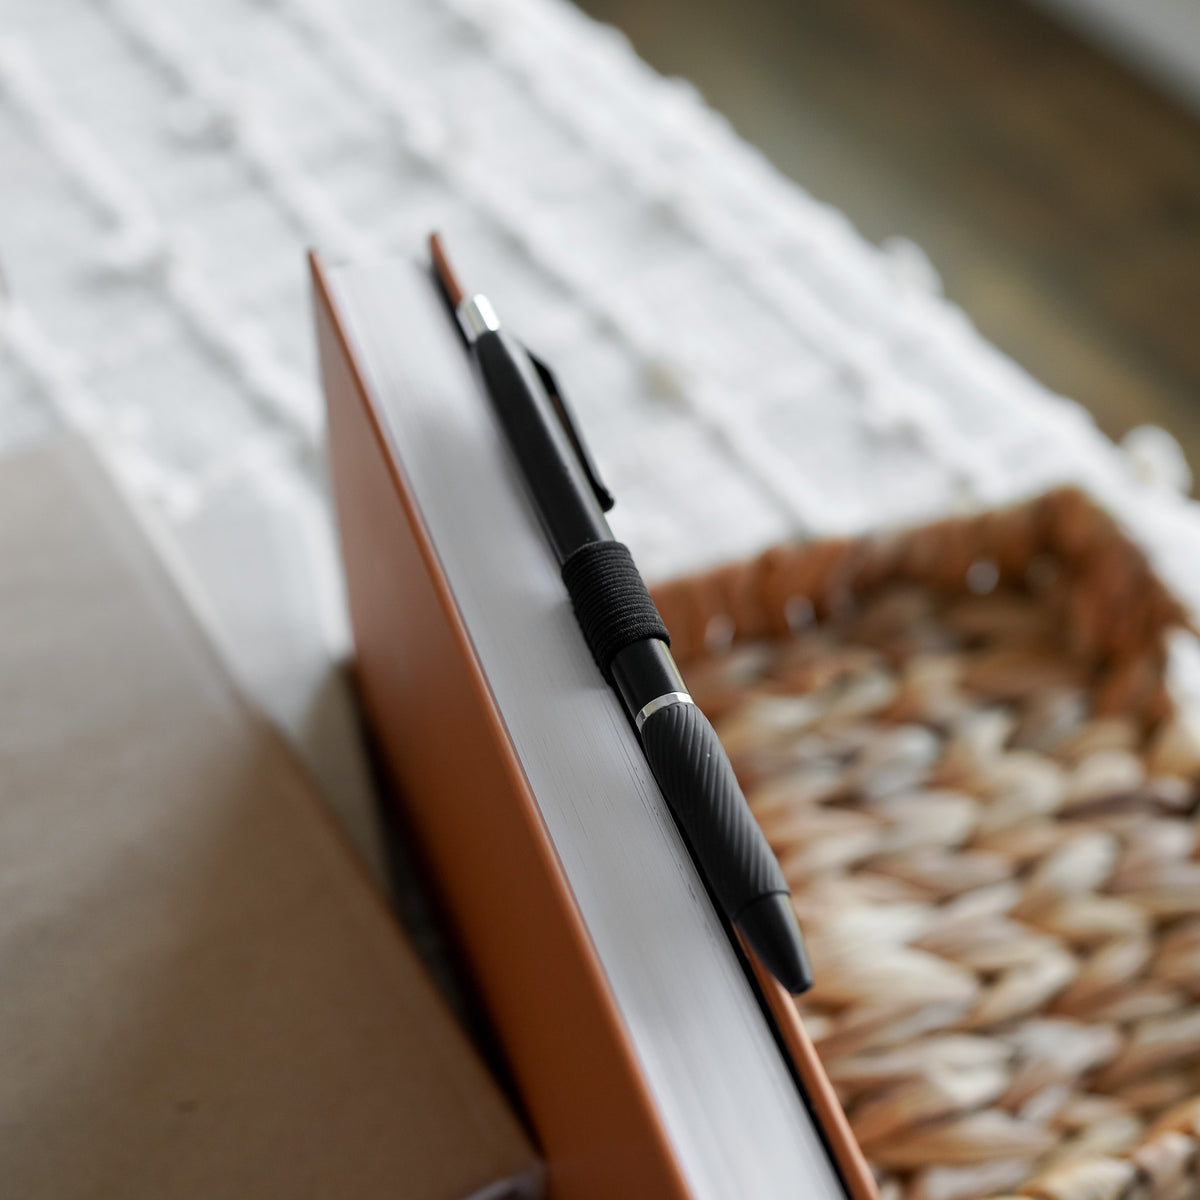 Reading Journal Pen Loop is an elestic black loop that attaches to a journal and holds a pen